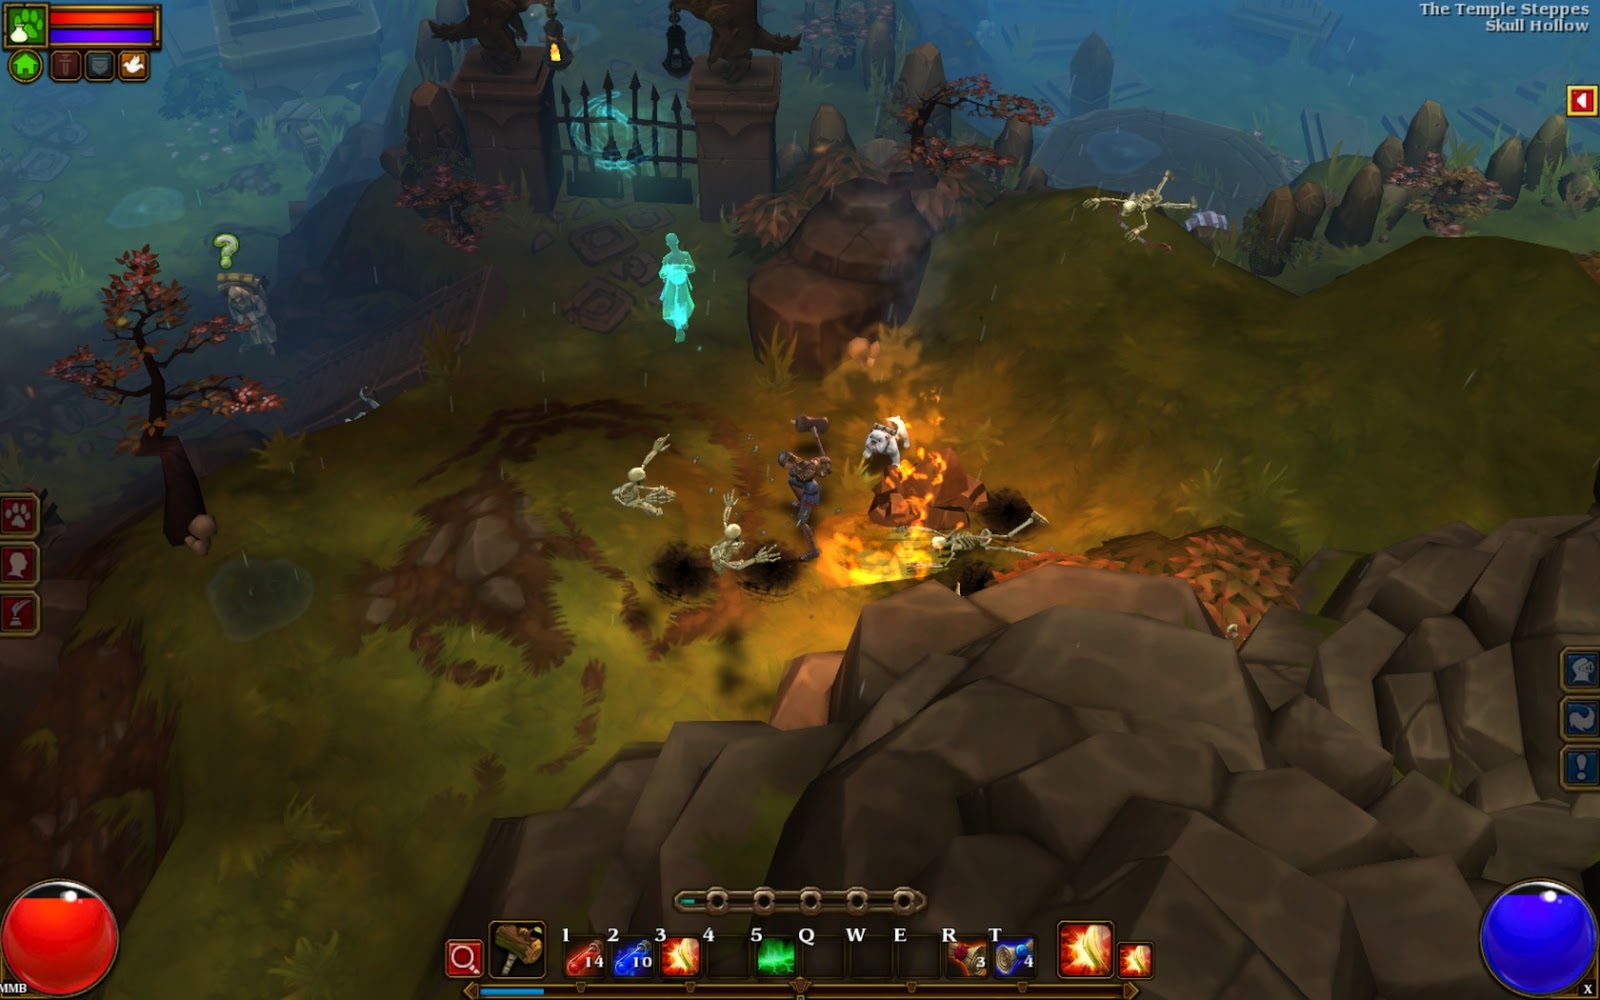 torchlight 2 ps4 download free